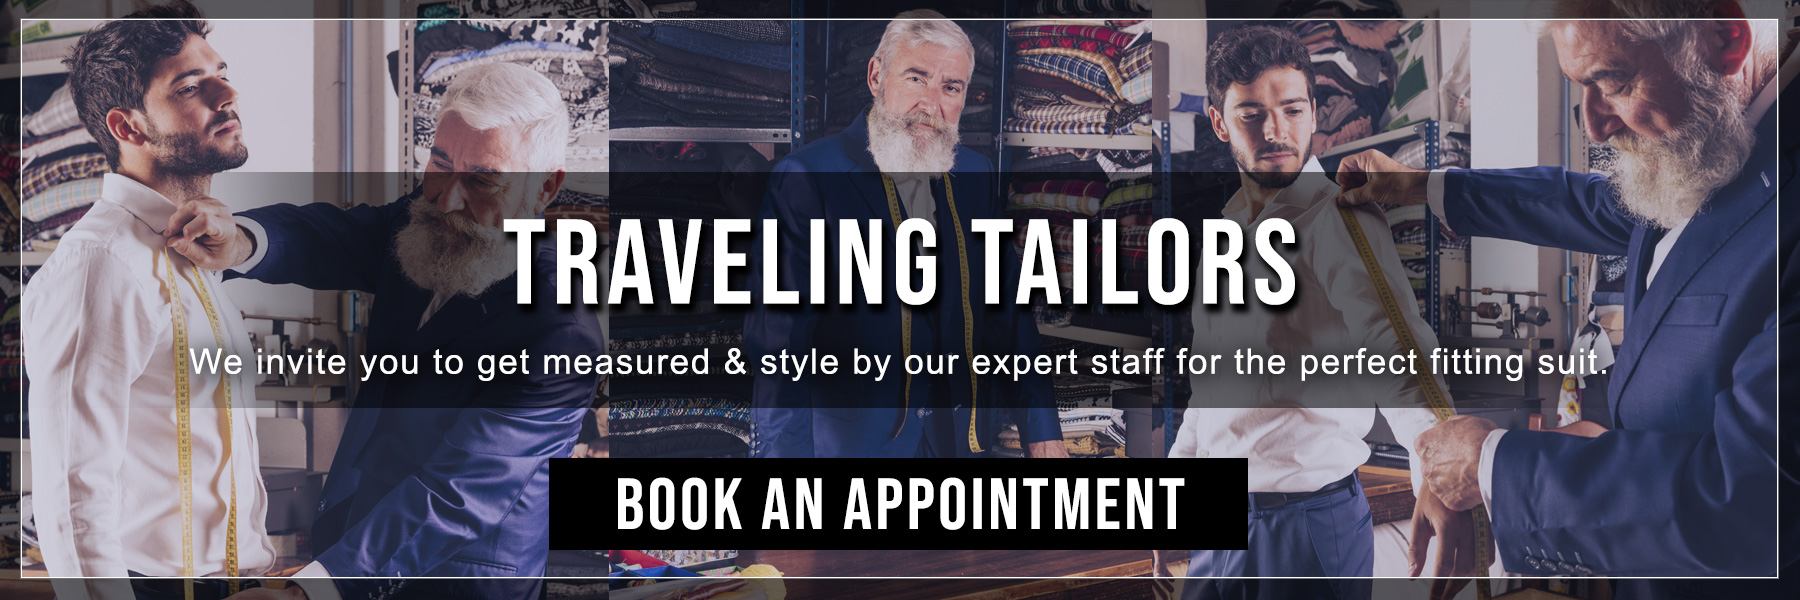 Travelling Tailor